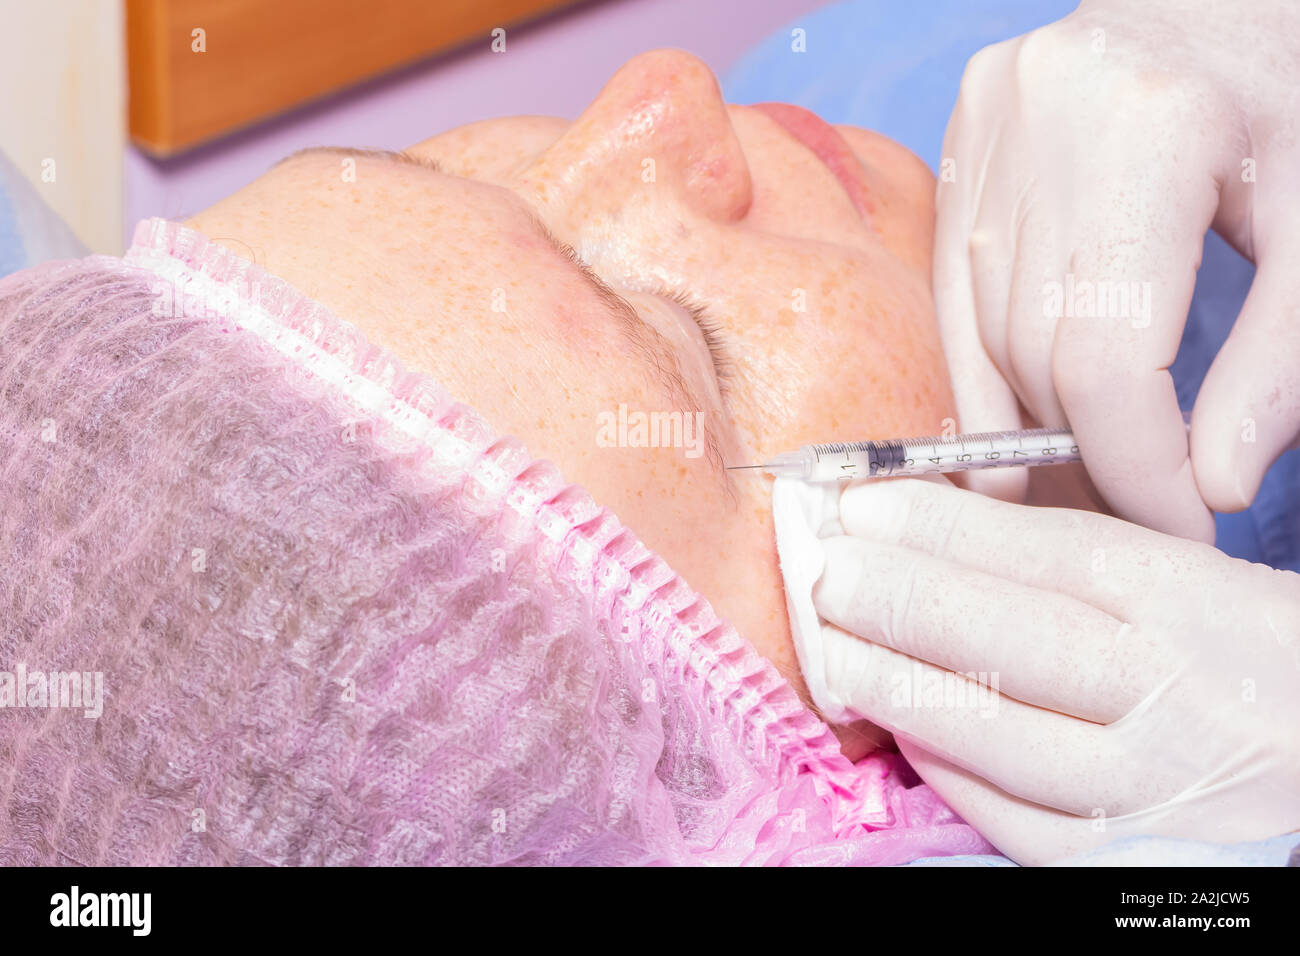 Hyaluronic acid injection for facial rejuvenation procedure. Close-up Stock Photo